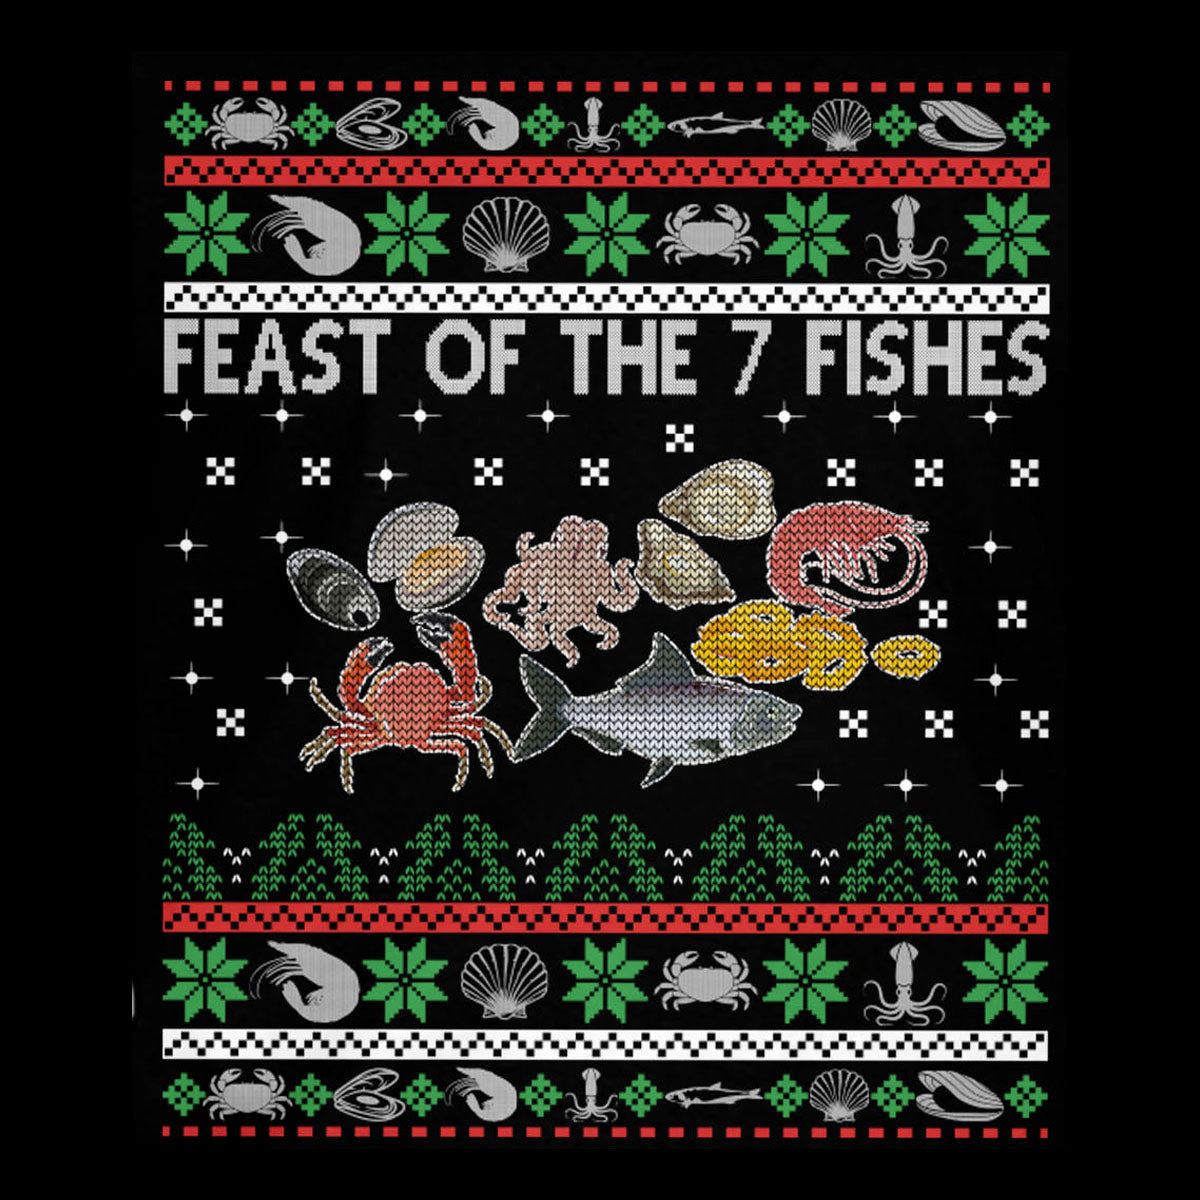 Feast Of The 7 Fishes Crewneck